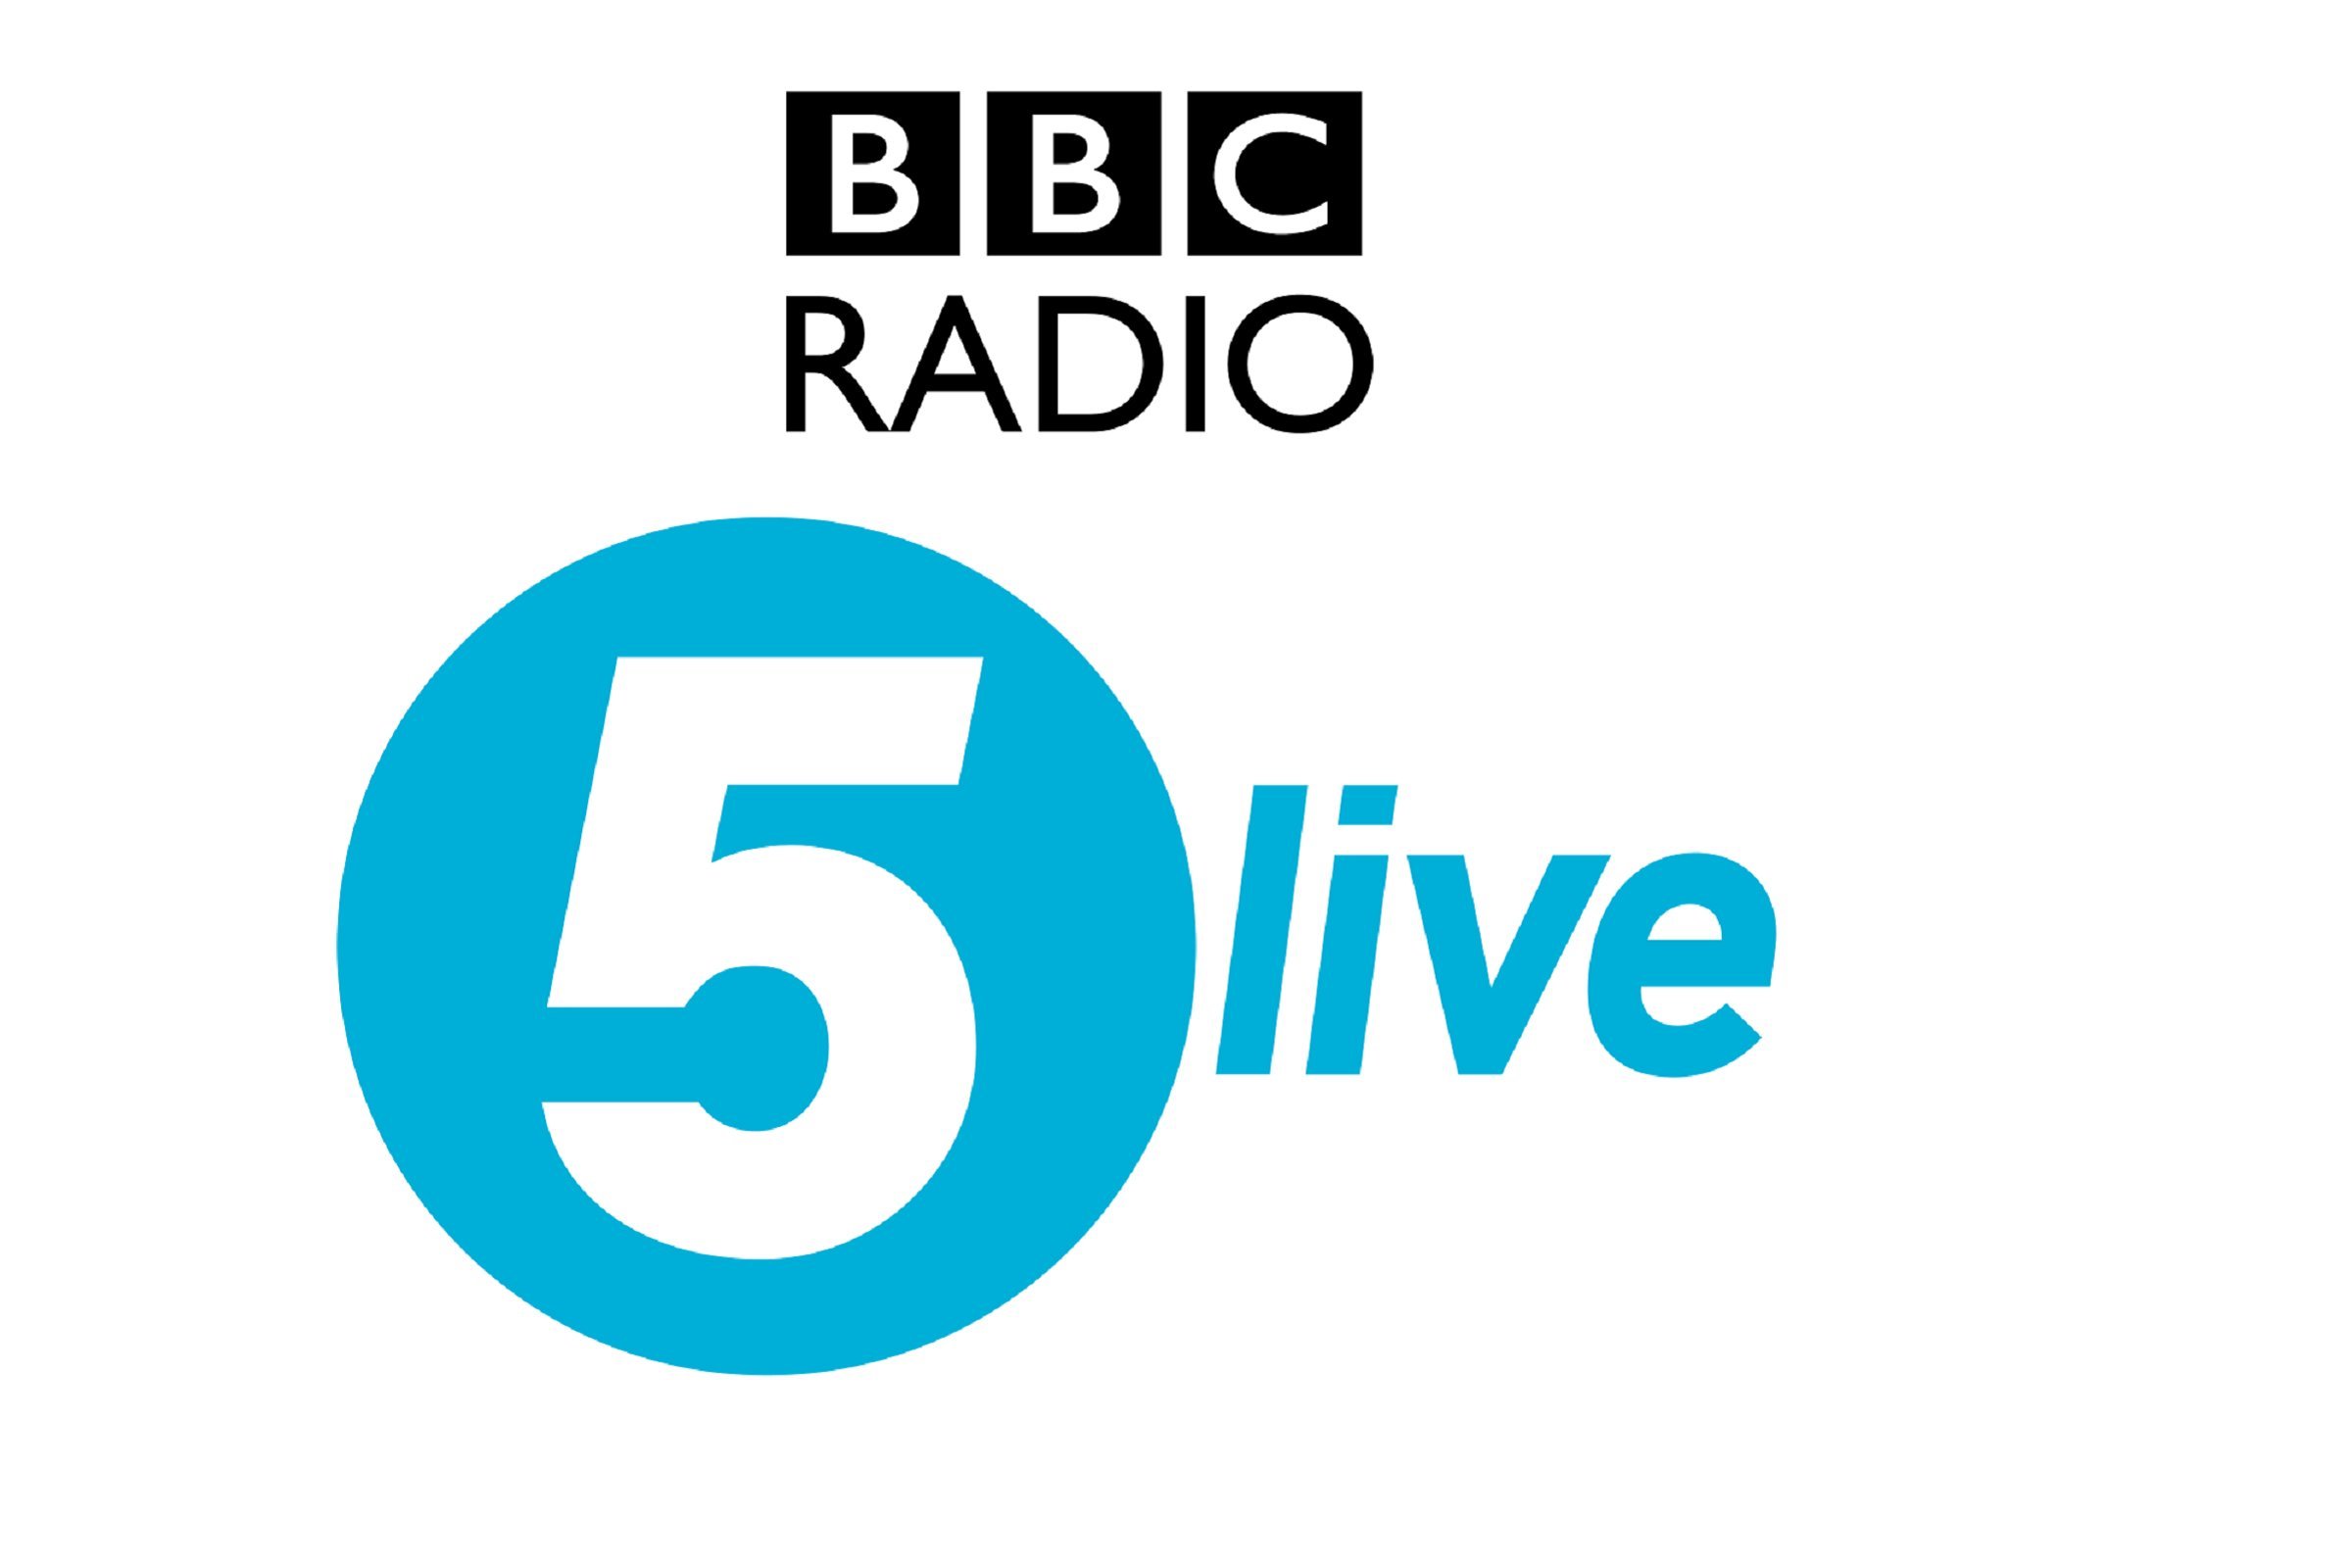 Ben Ryan on BBC 5 Live discussing Christianity and Mental Health